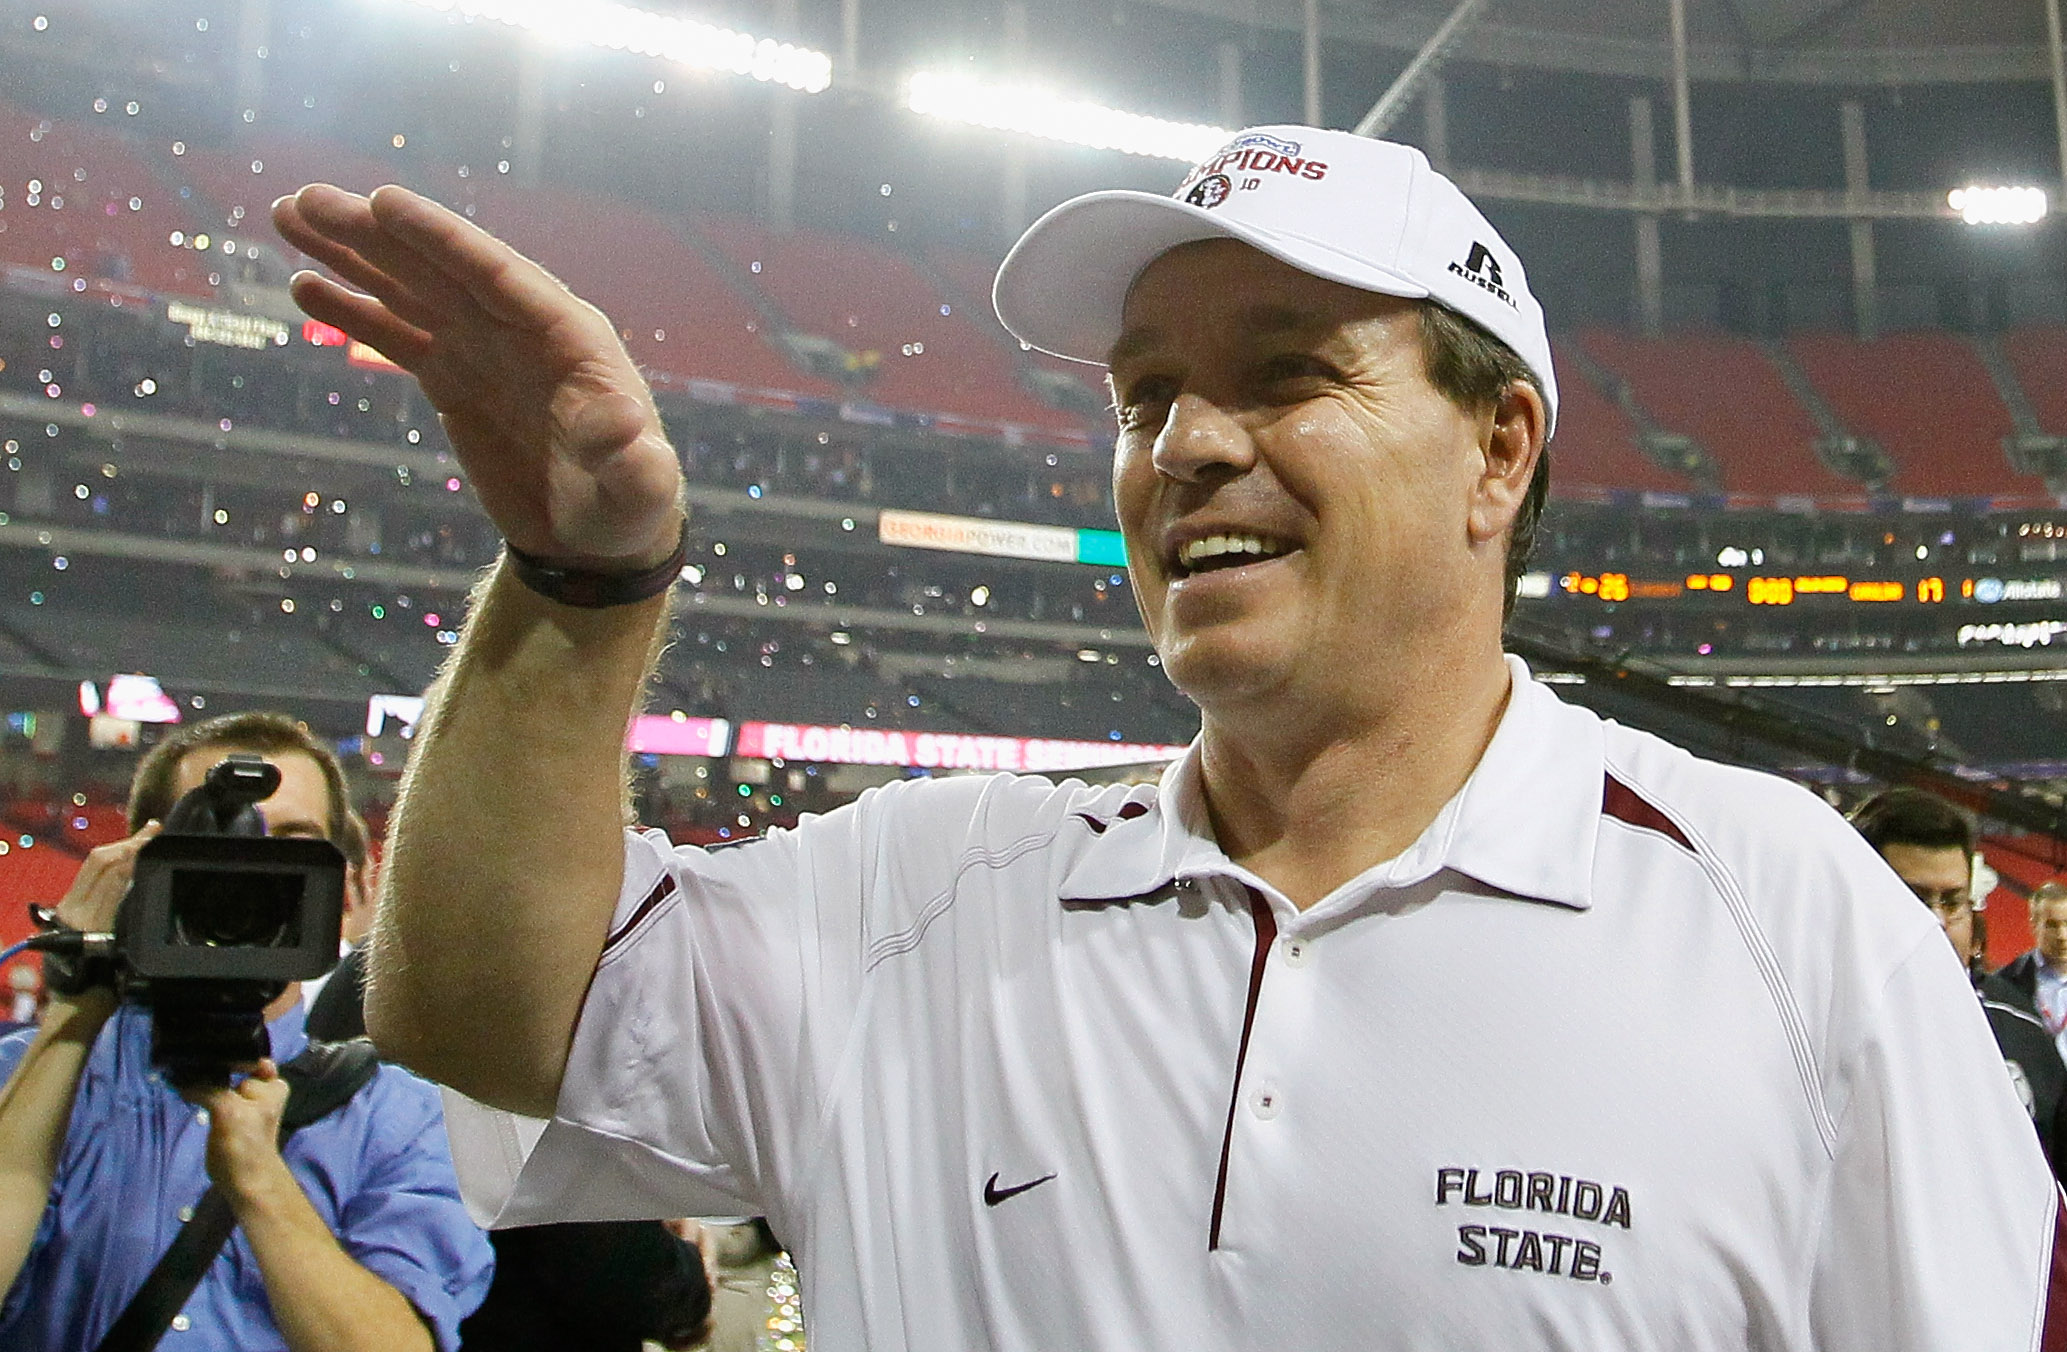 ATLANTA, GA - DECEMBER 31:  Head coach Jimbo Fisher of the Florida State Seminoles sideline reacts after their 26-17 win over the South Carolina Gamecocks during the 2010 Chick-fil-A Bowl at Georgia Dome on December 31, 2010 in Atlanta, Georgia.  (Photo b